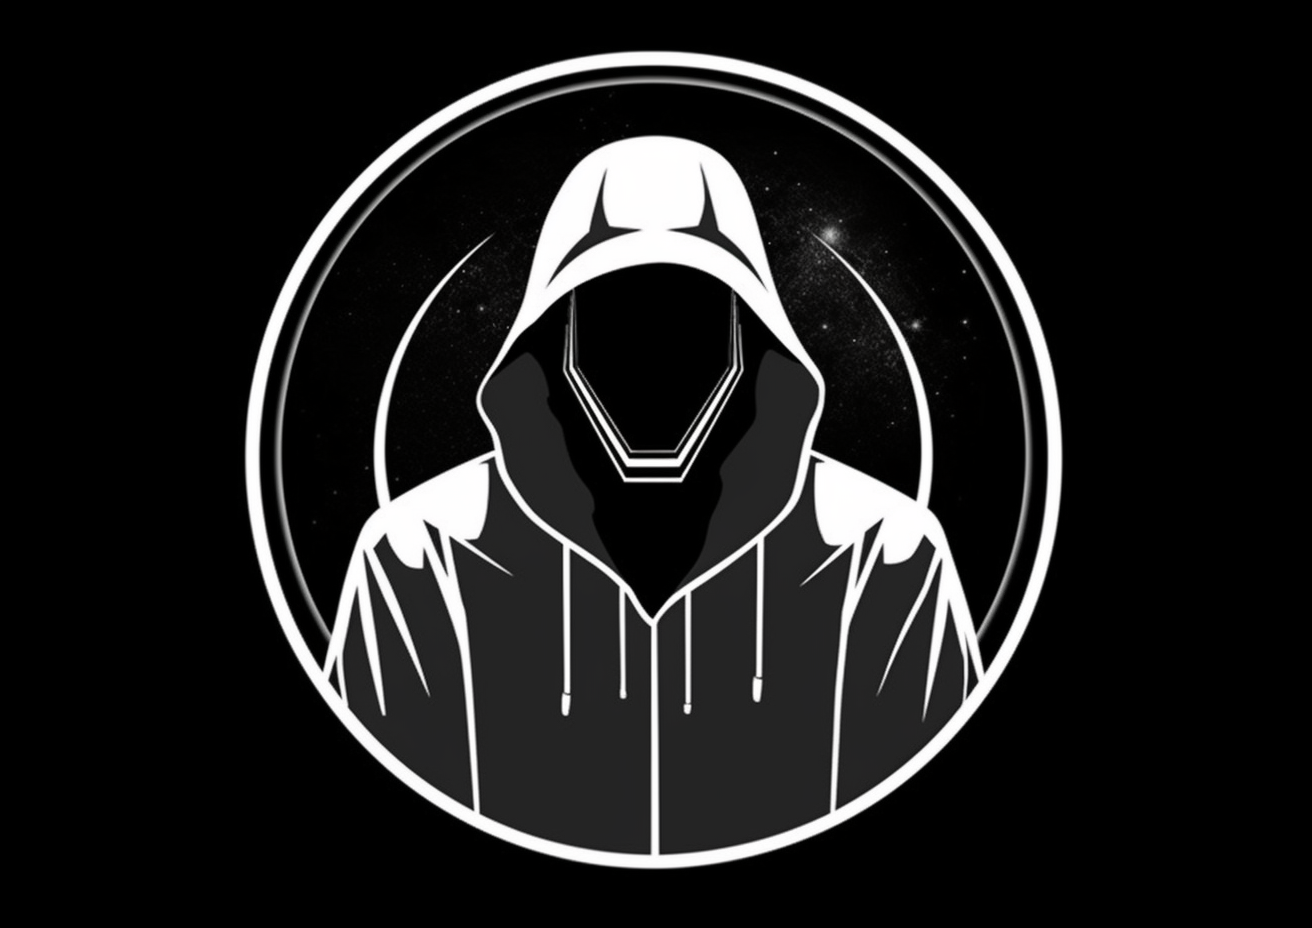 techno-syndicate.org